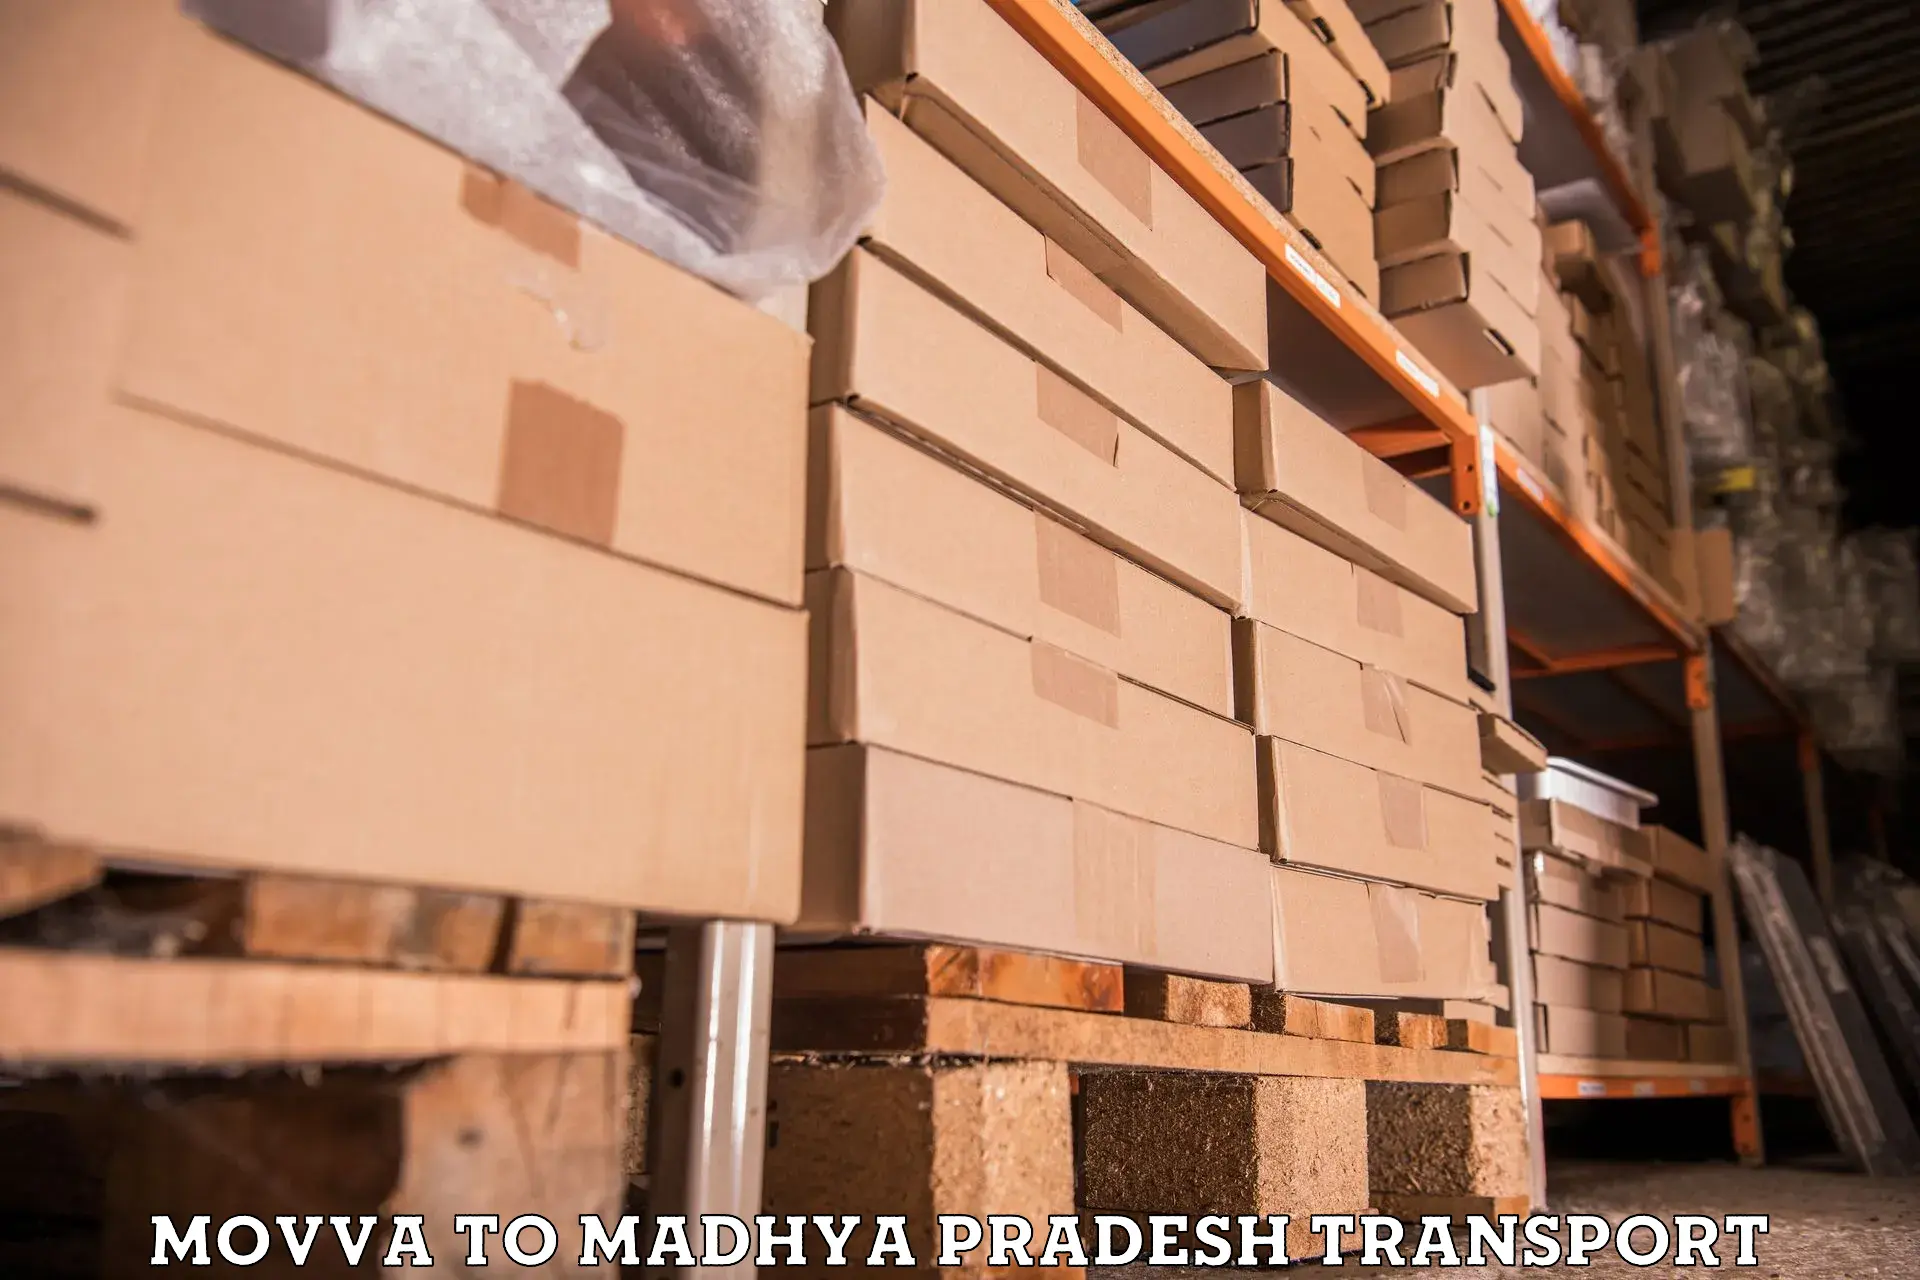 Online transport service Movva to Pachore